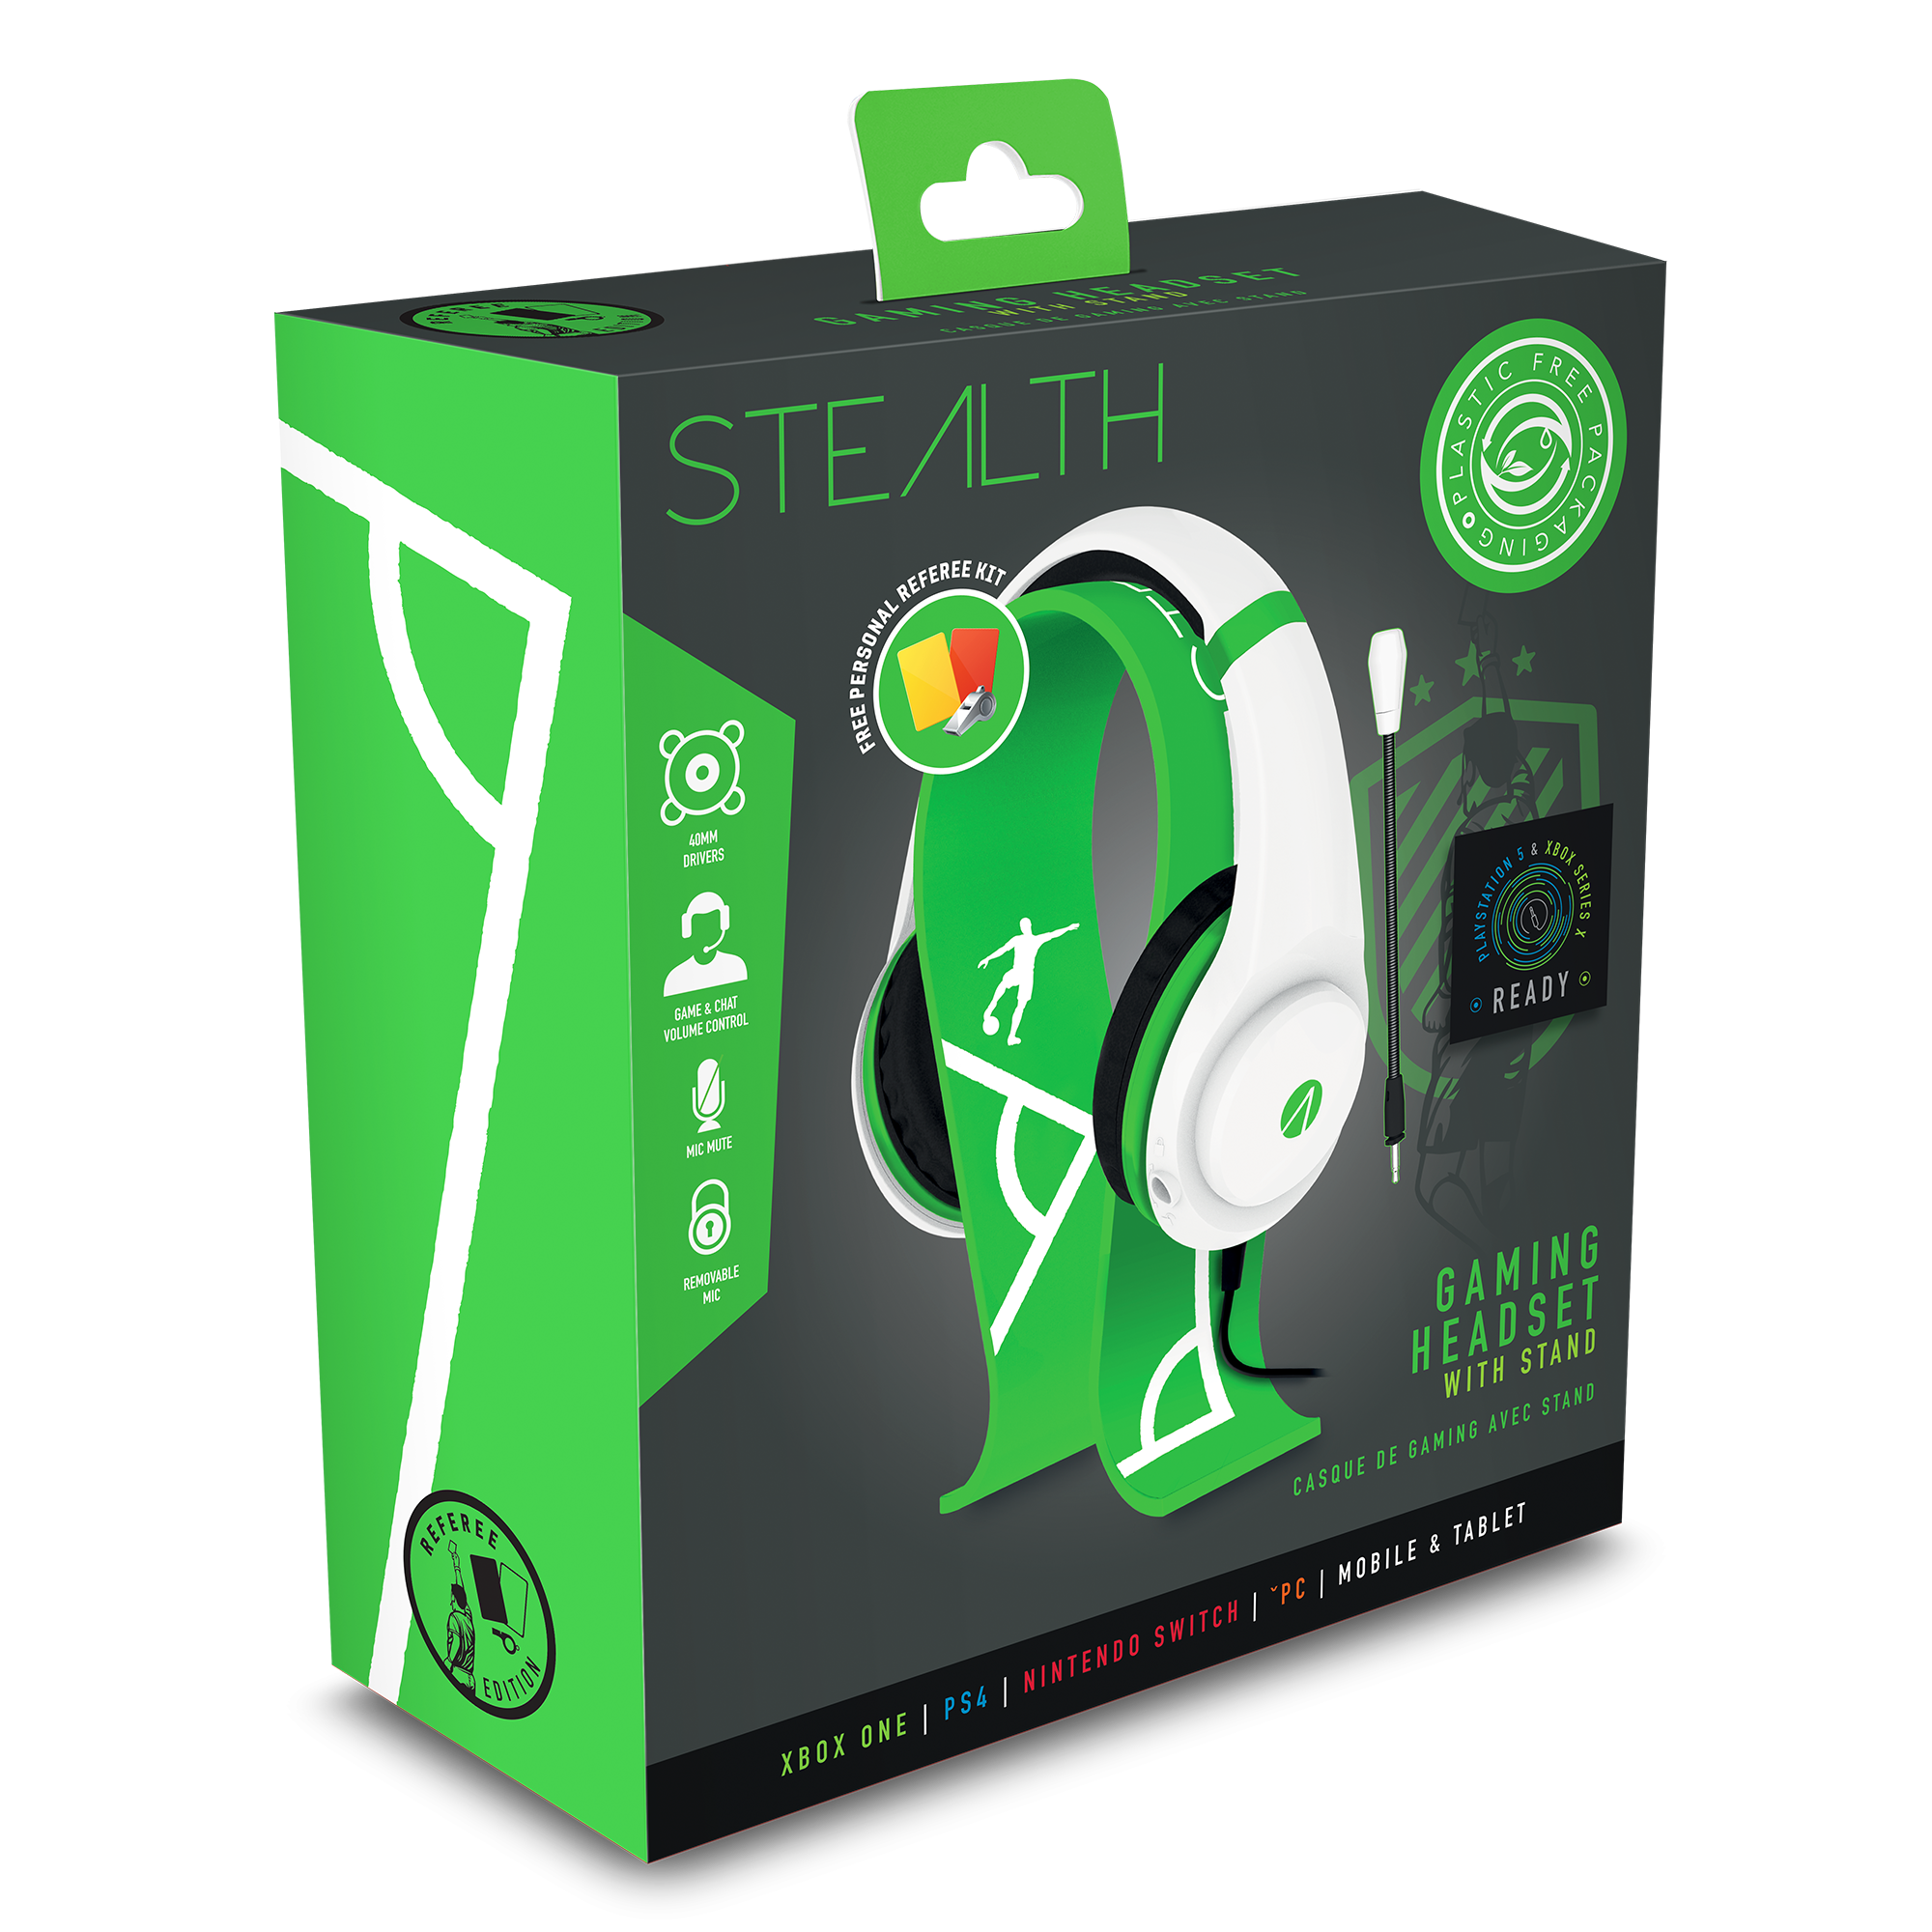 Stealth Gaming Headset & Stand Bundle Referee Edition for Xbox One, PS4, PC